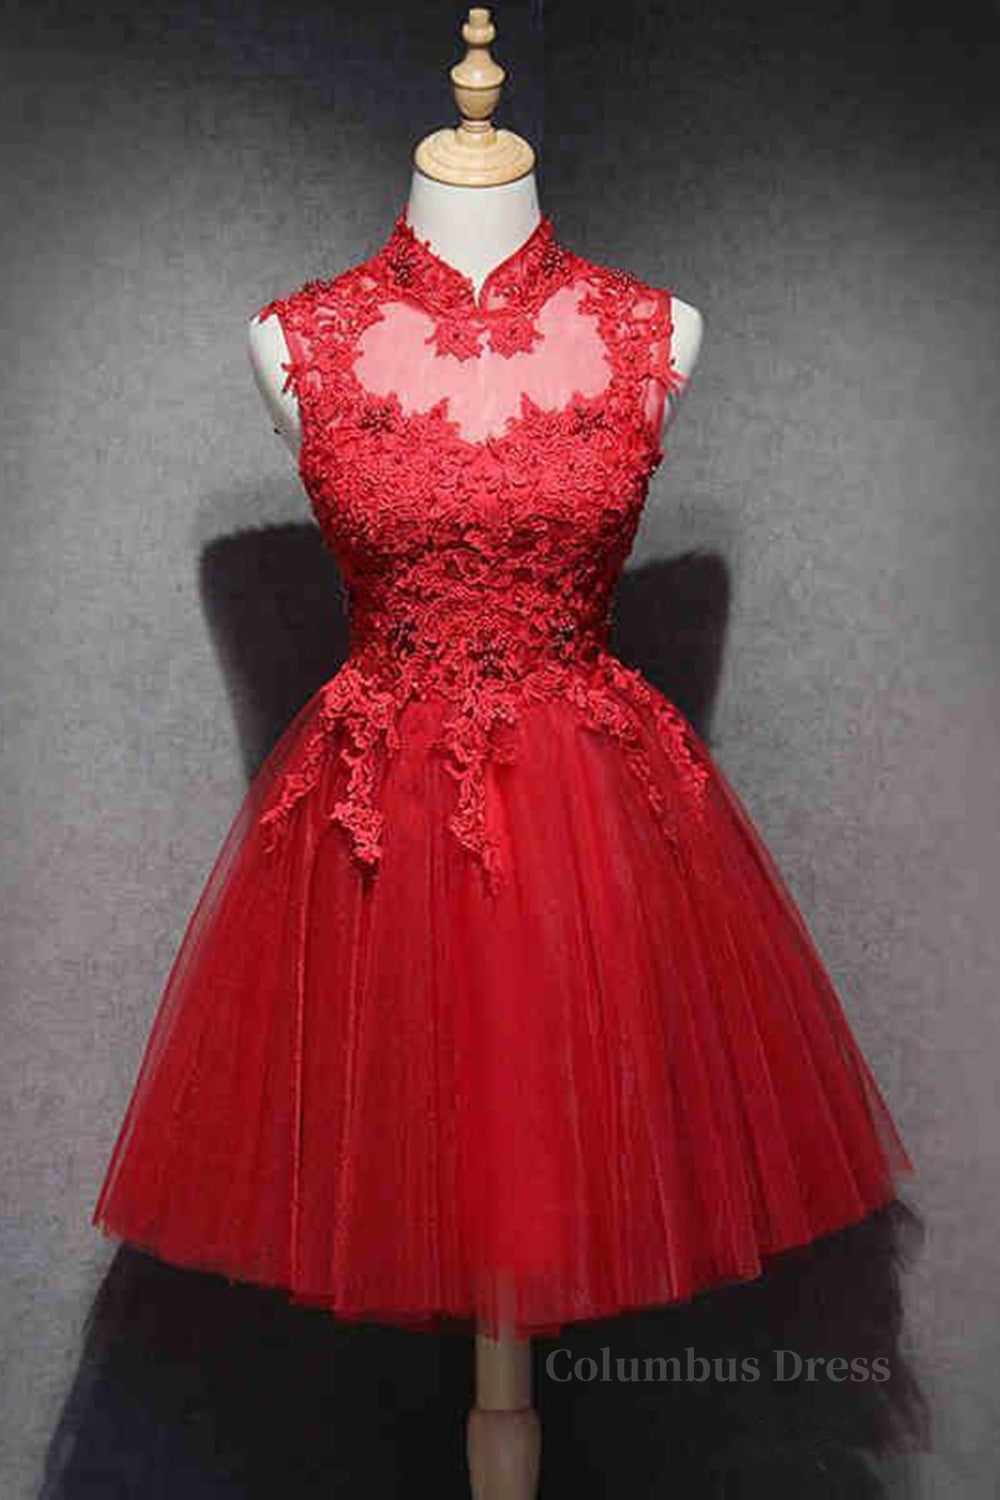 High Neck Red Lace Short Corset Prom Dress, Red Lace Corset Homecoming Dress, Red Corset Formal Graduation Evening Dress outfit, Pretty Dress